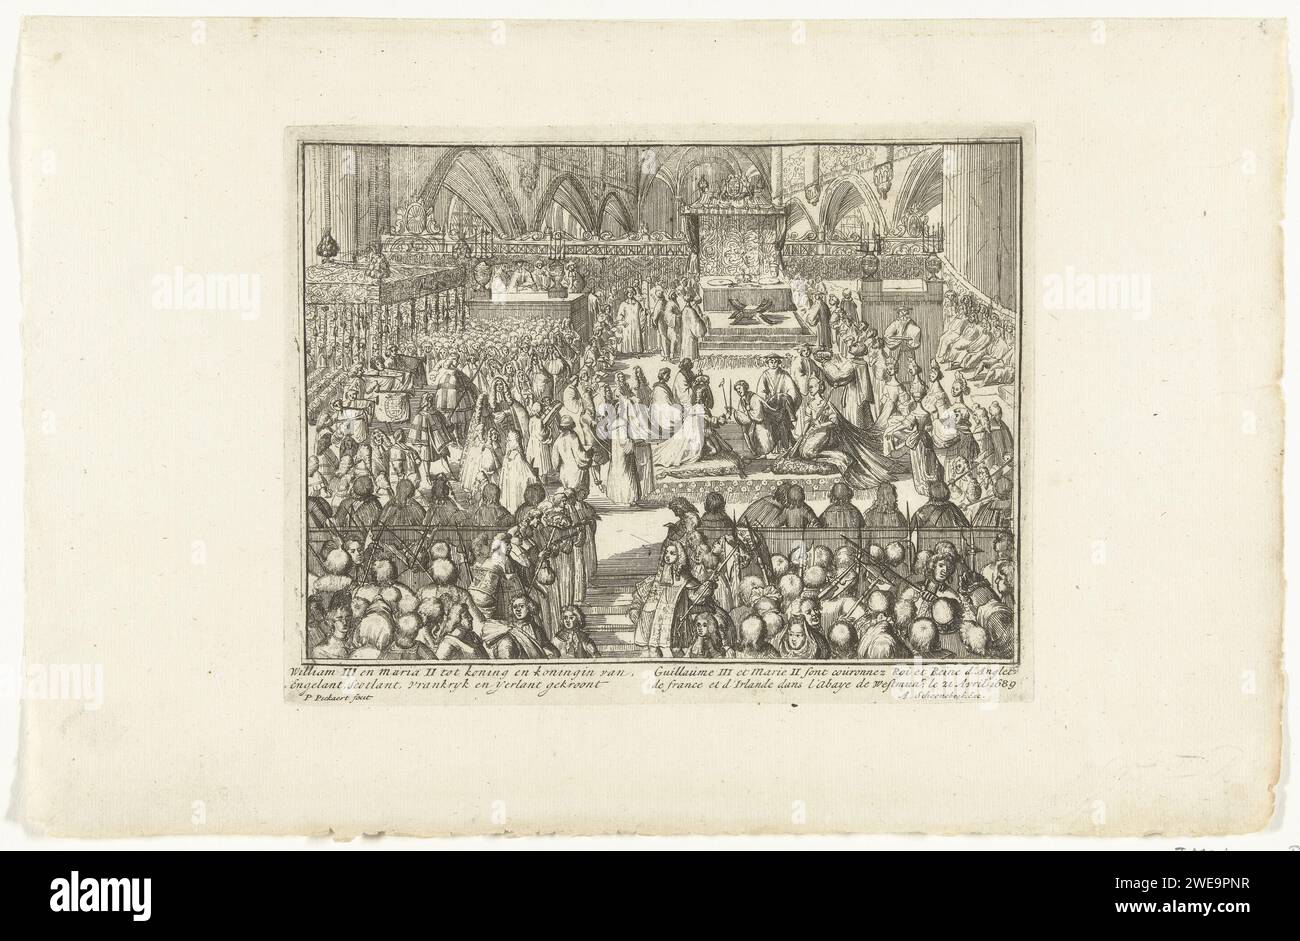 Coronation of Willem III and Maria, 1689, Pieter Pickaert, 1689 print Coronation of Prince William III and Princess Maria Stuart as King and Queen of England, in Westminster Abbey on April 21, 1689. Part of the 'Engelants Schouwtoneel' series about the Glorious Revolution 1688-1689 (second part). With captions in Dutch and French. Amsterdam paper etching during the coronation Westminster Abbey Stock Photo